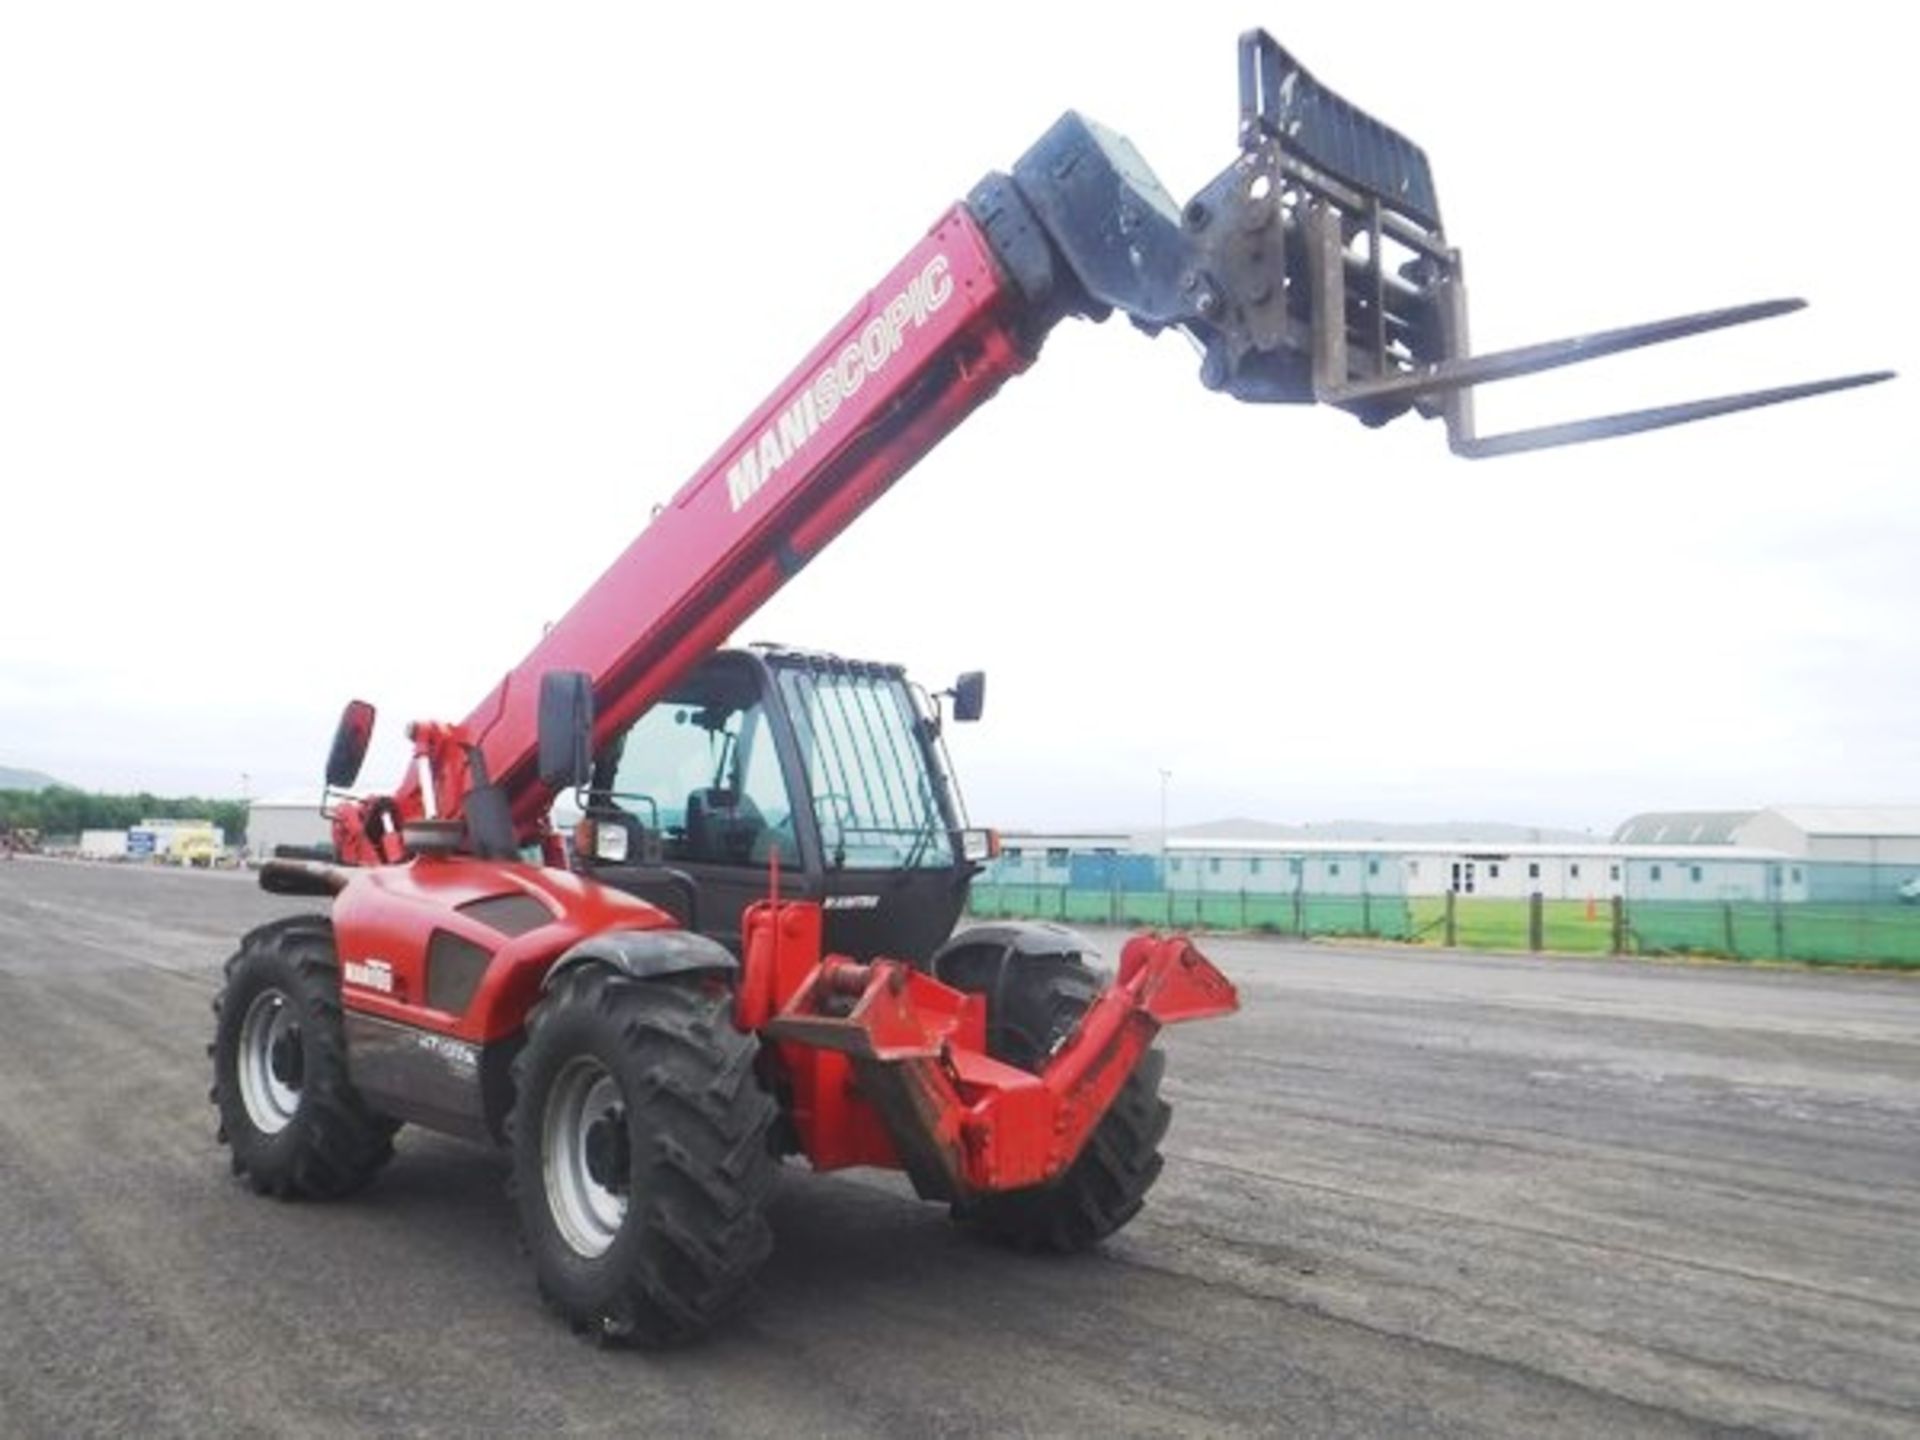 2006 MANITOU 14/35 TELEHANDLER c/w bucket & forks s/n 1230044 Reg no SP06 AXX 2646hrs (not verified) - Image 26 of 31